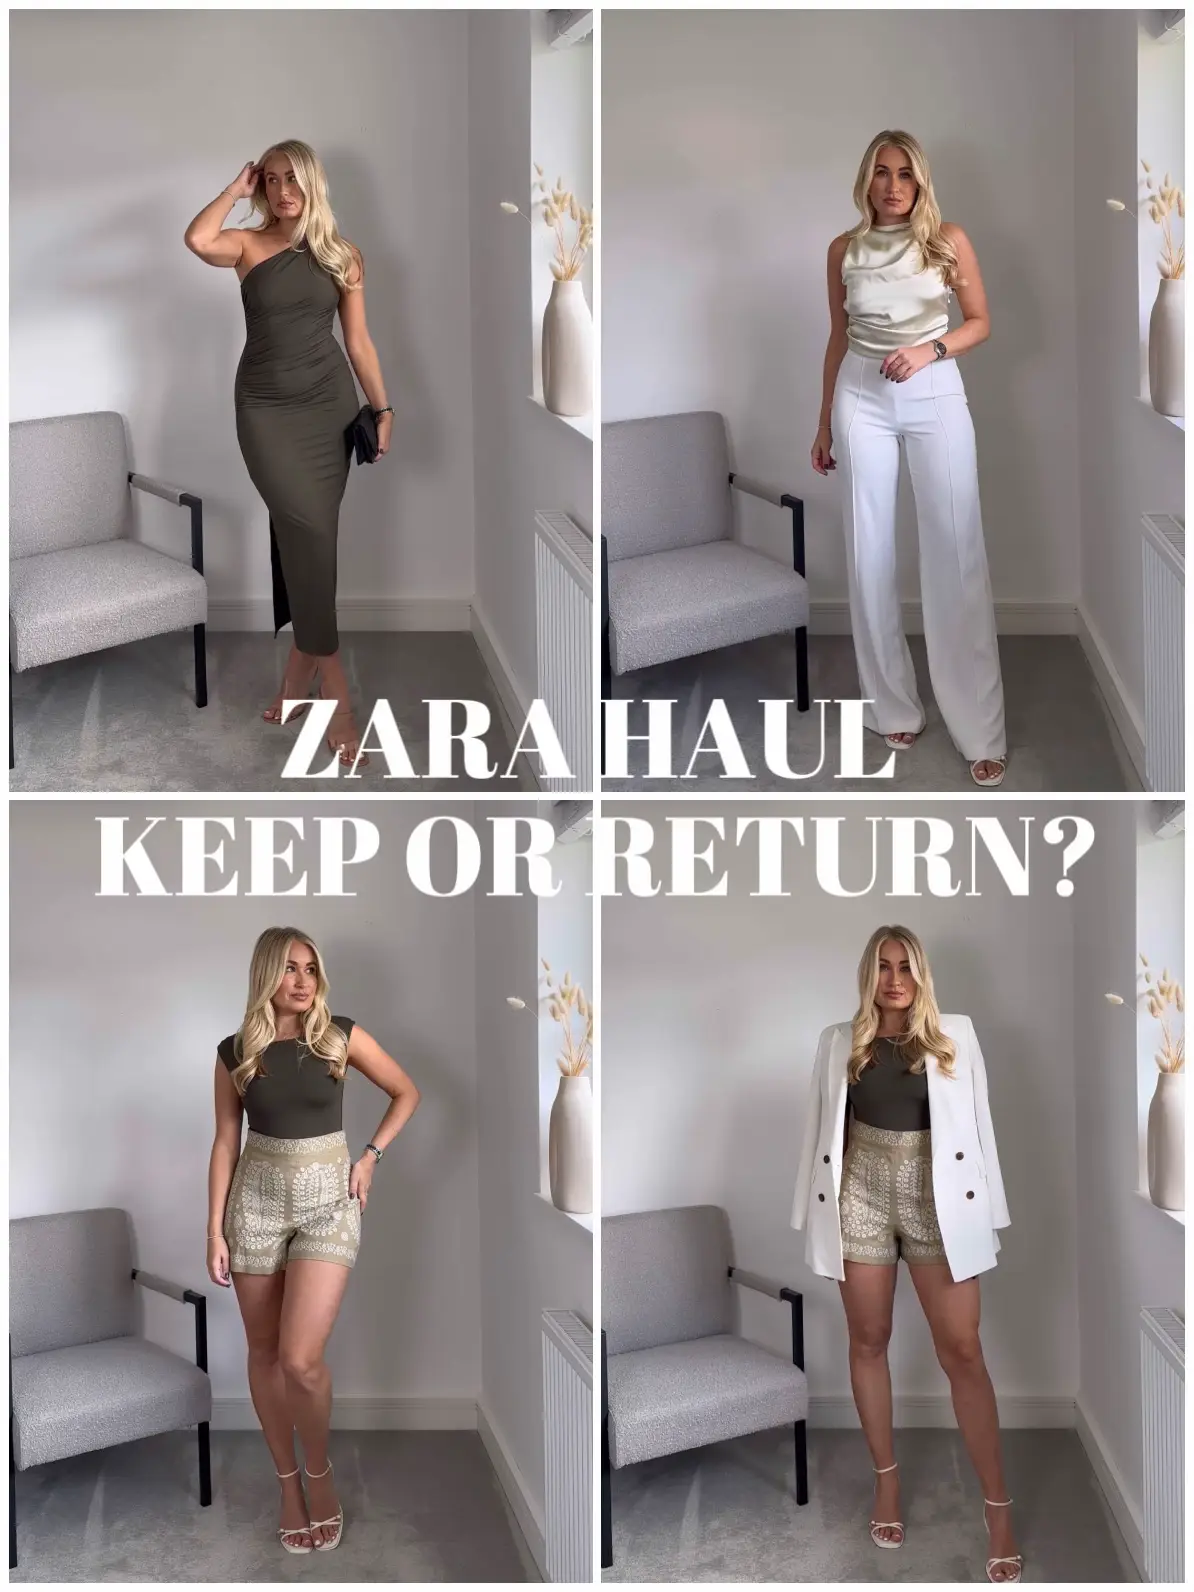 Zara limitless contour collection is where it's at #zara #zarahaul